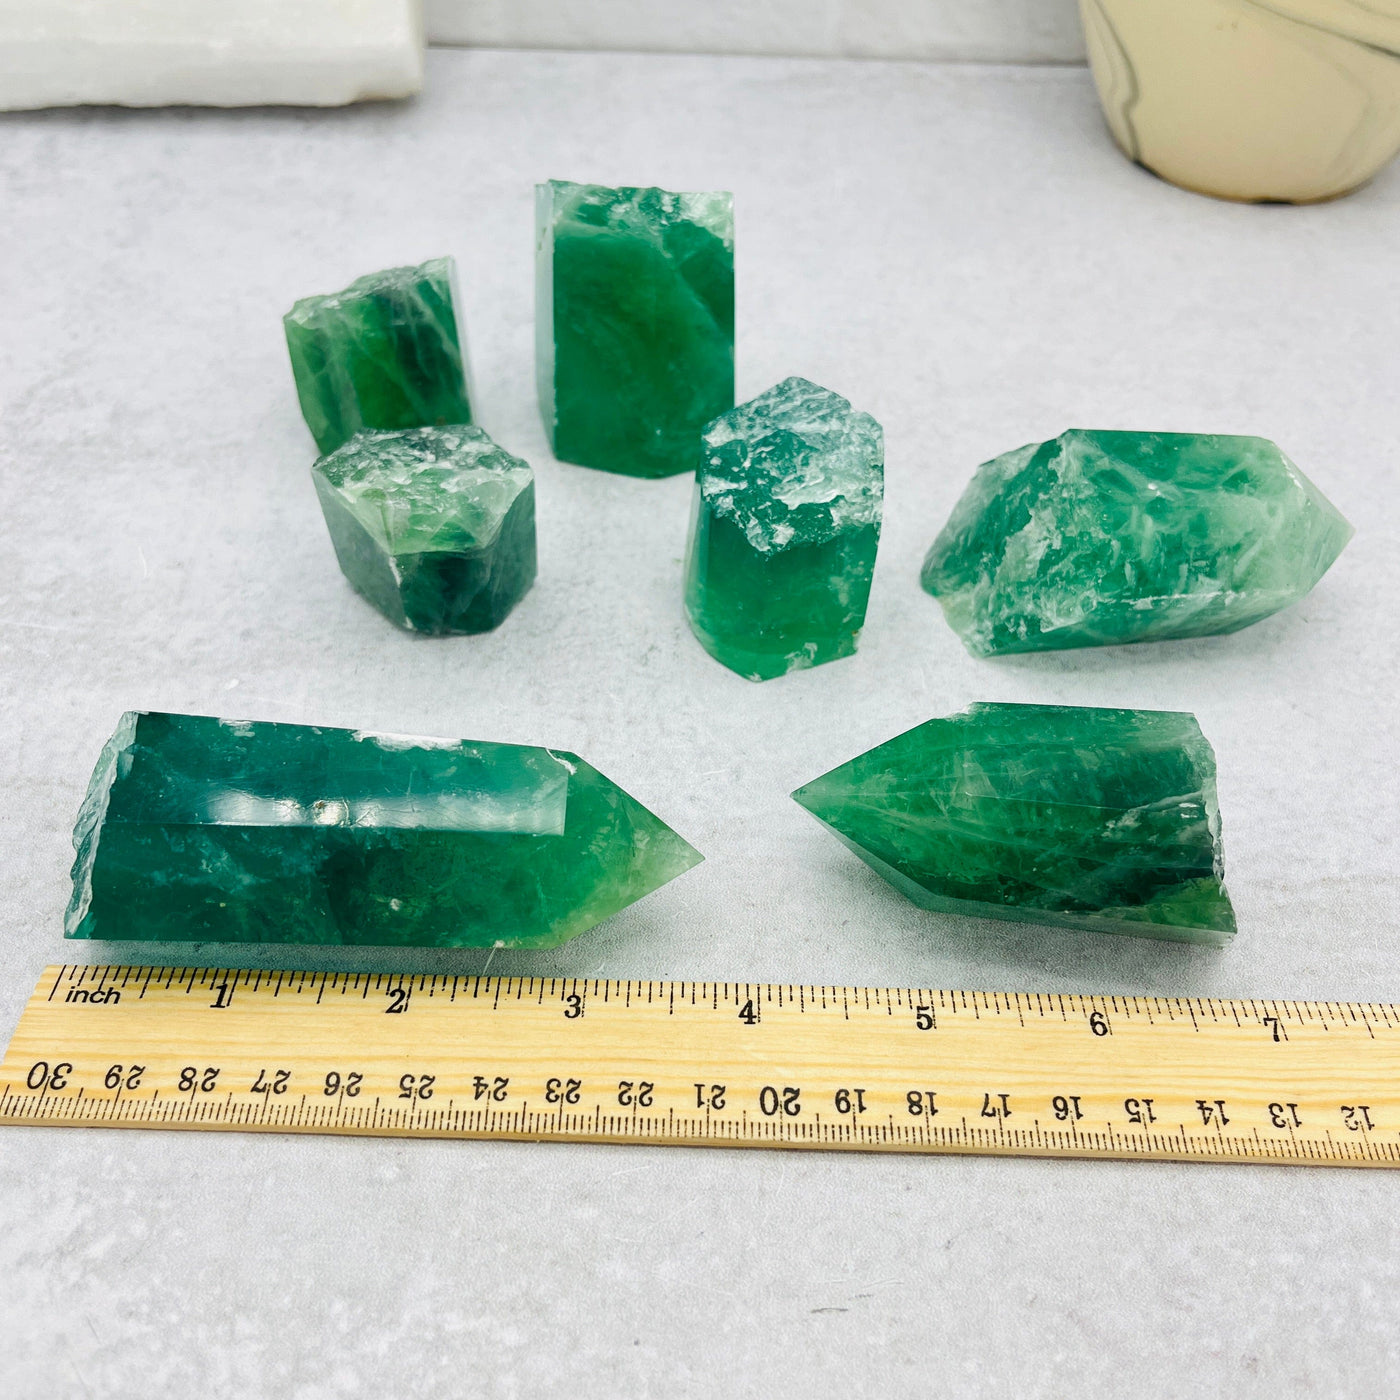 Green Fluorite Crafters 2.5lb Bag- With Measurements